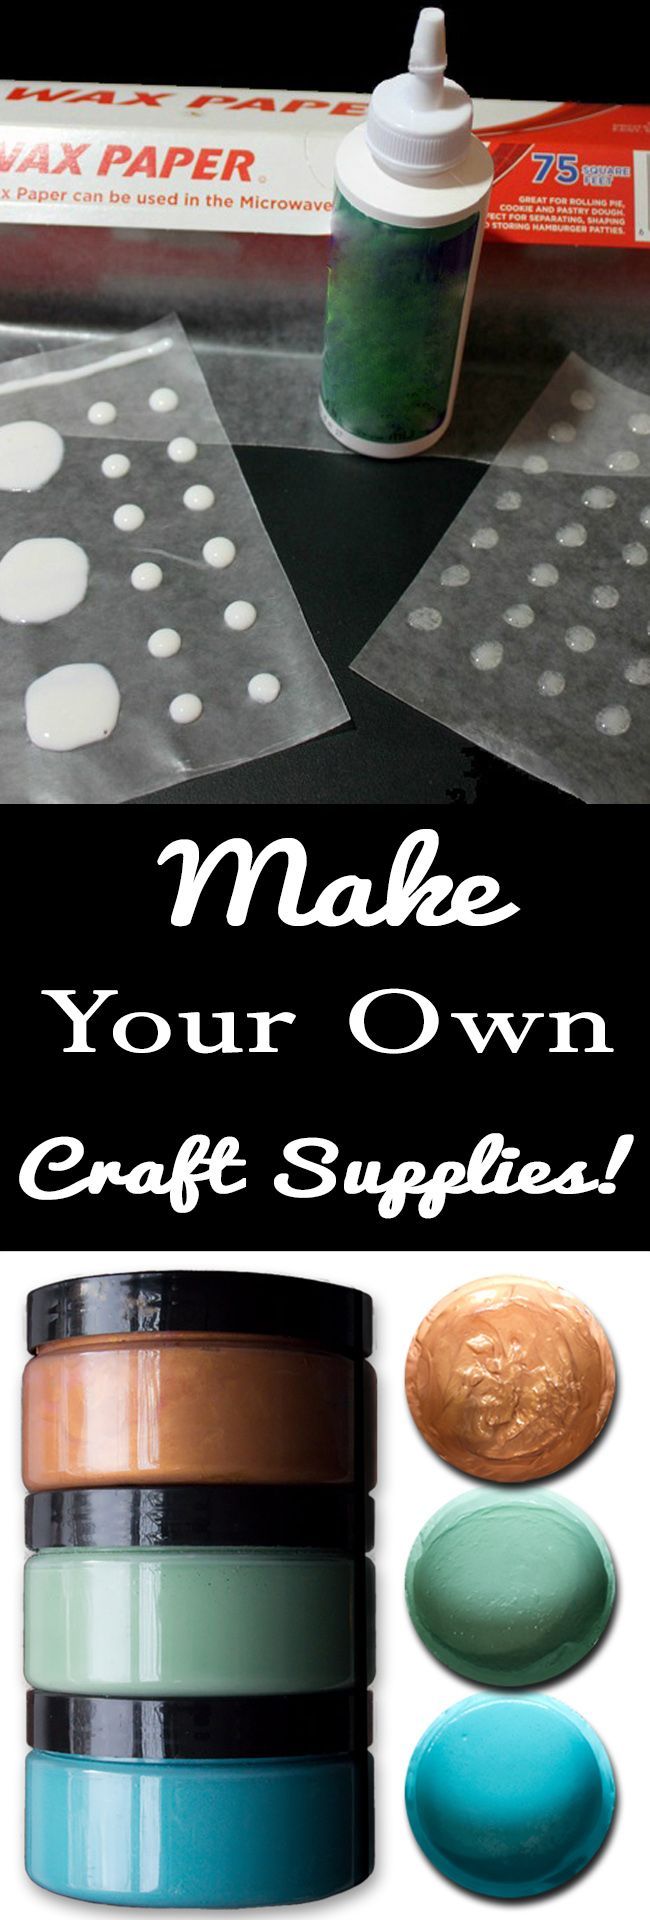 Make Your Own Mixed Media Craft Supplies! -   24 homemade crafts supplies
 ideas